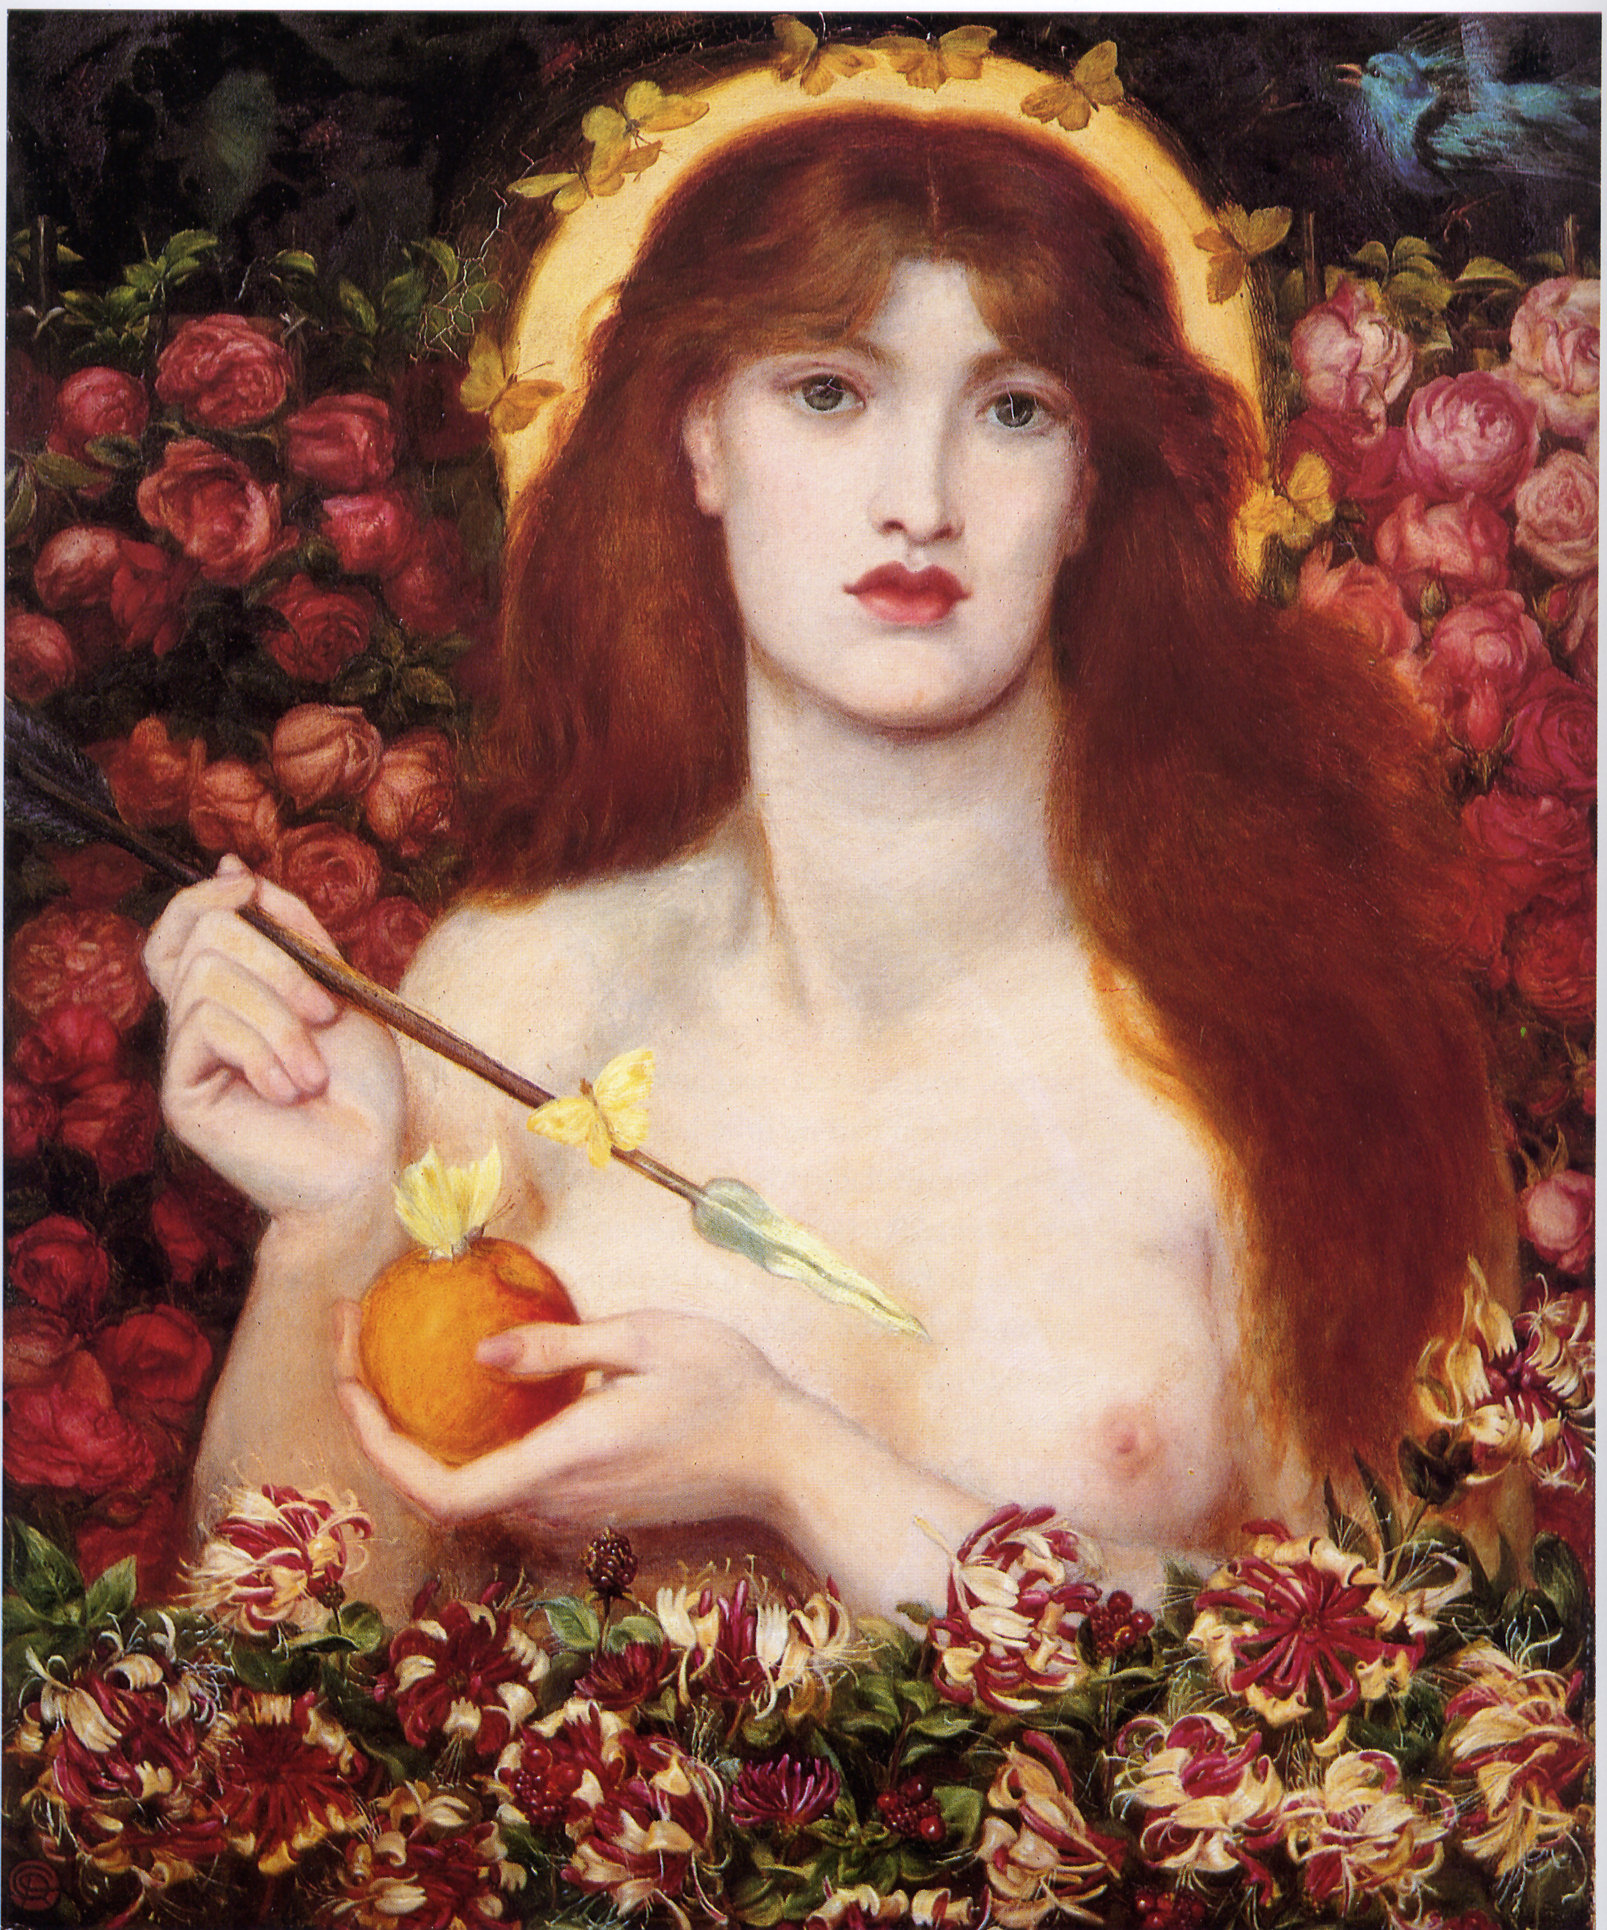 Venus Verticordia by Dante Gabriel Rossetti - 1868 -  83.8 x 71.2cm Russell-Cotes Art Gallery and Museum